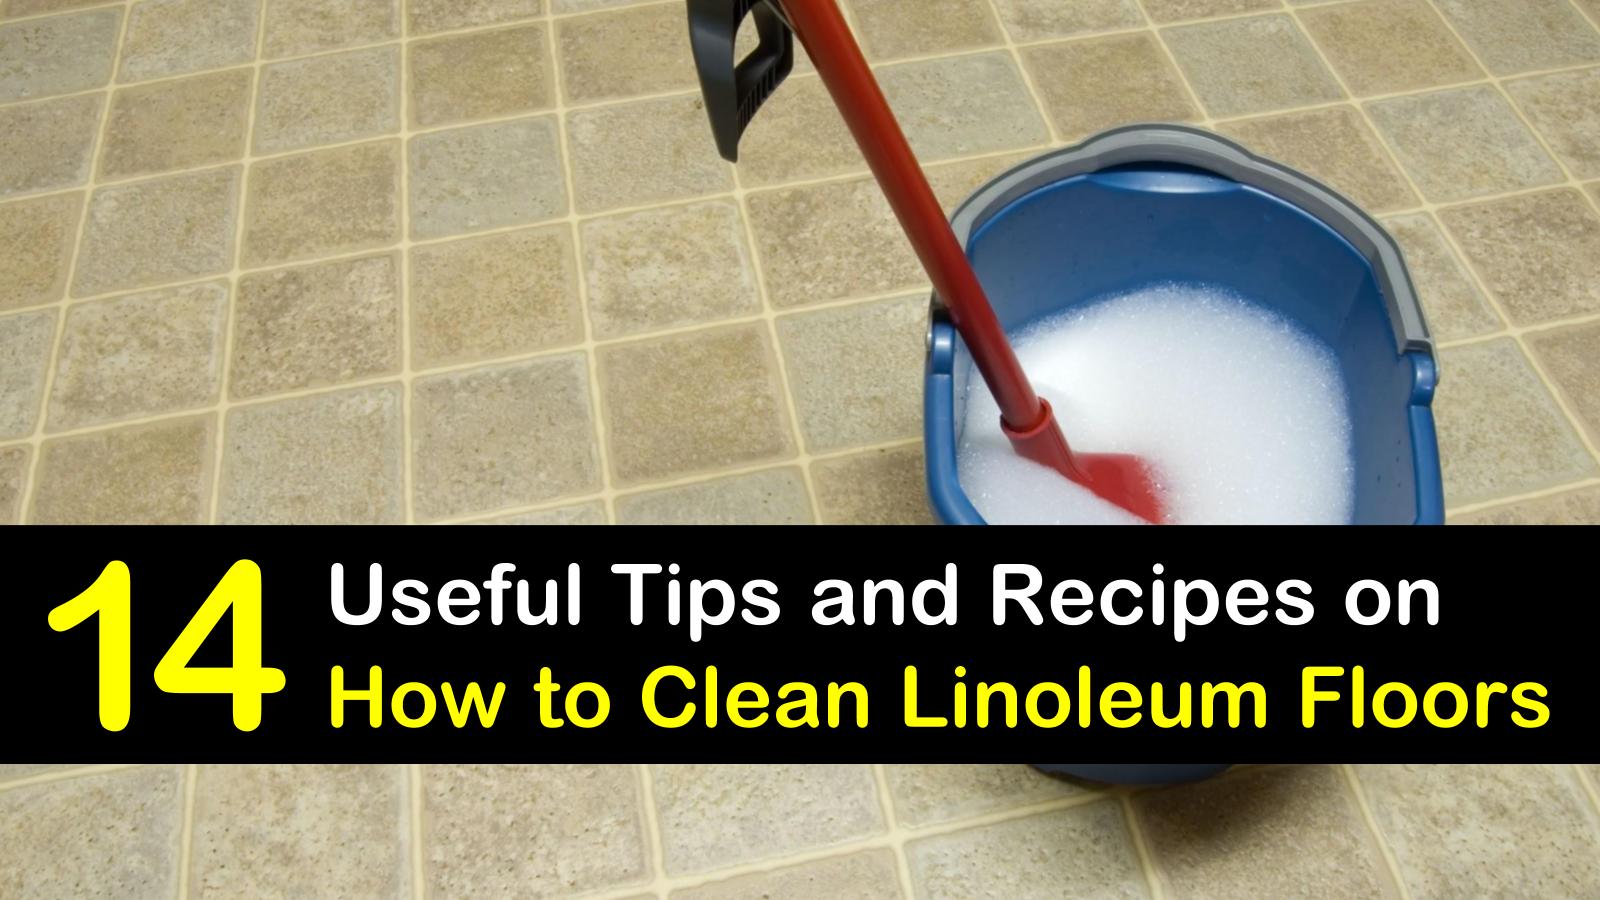 14 Creative Ways To Clean Linoleum Floors,What Do Cats Like To Do With Humans